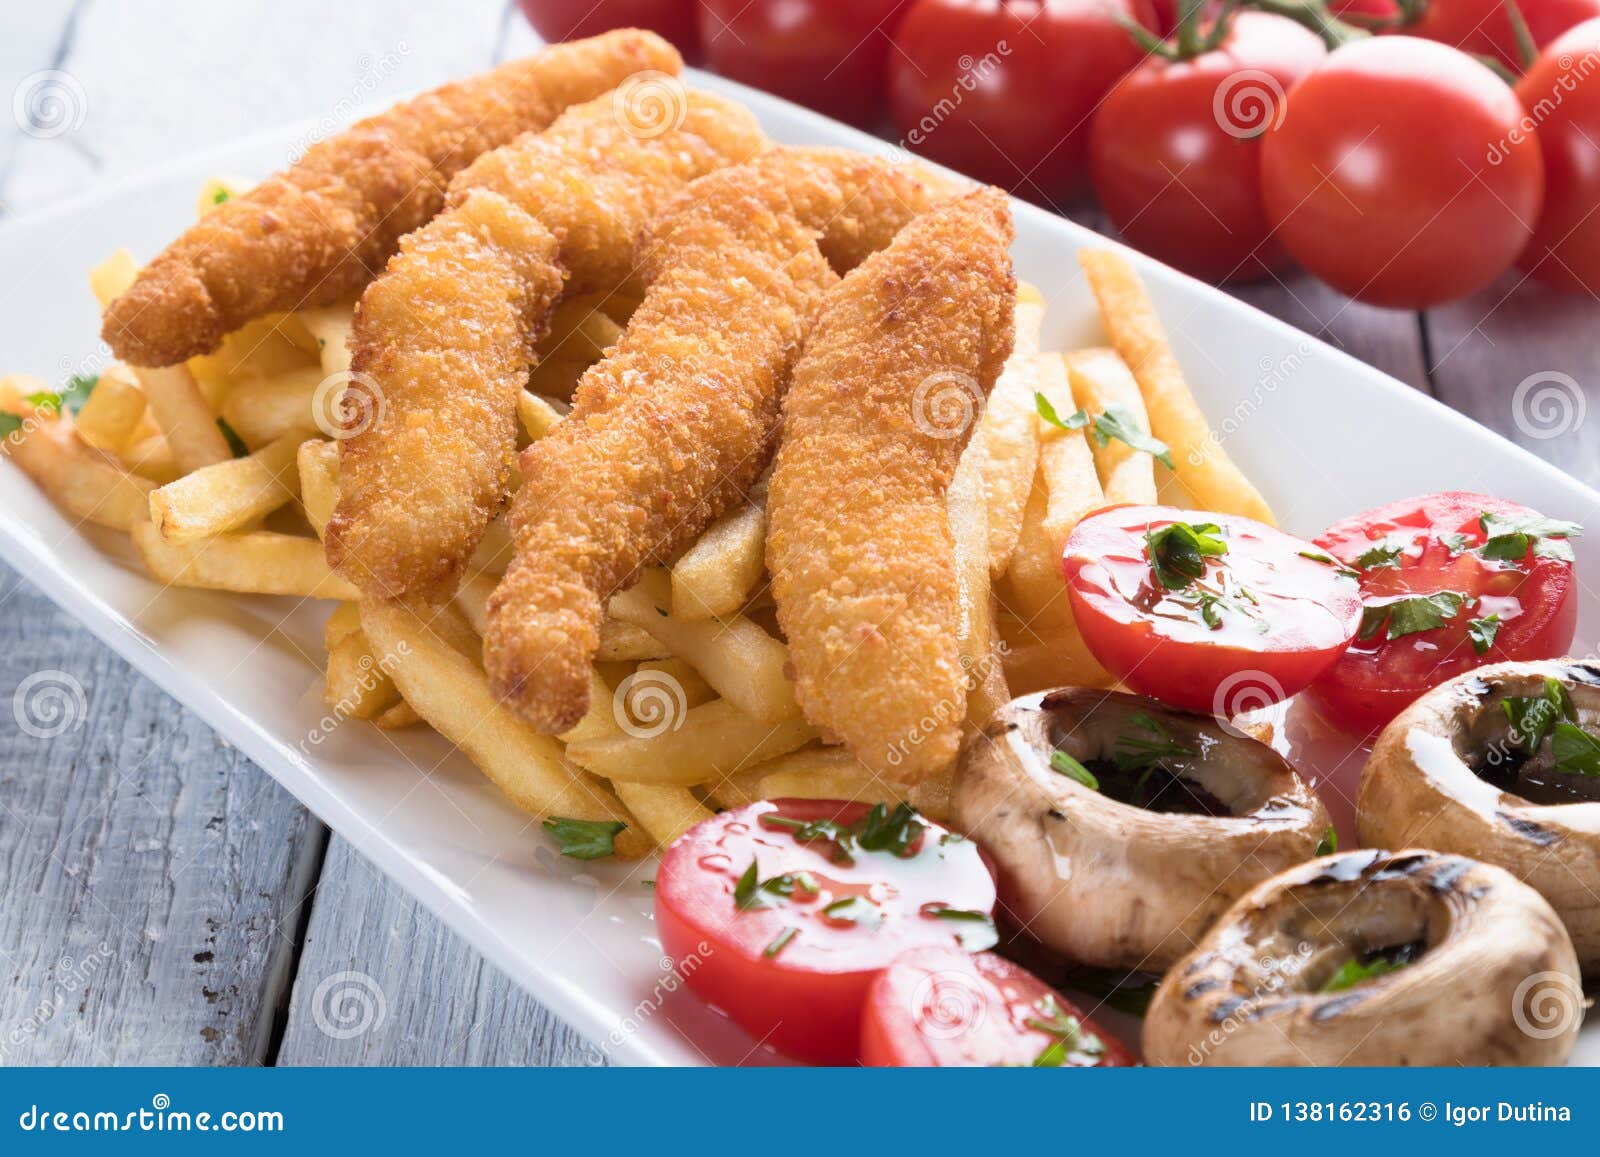 Chicken Frites with Potato Chips Stock Photo - Image of meal, breaded ...